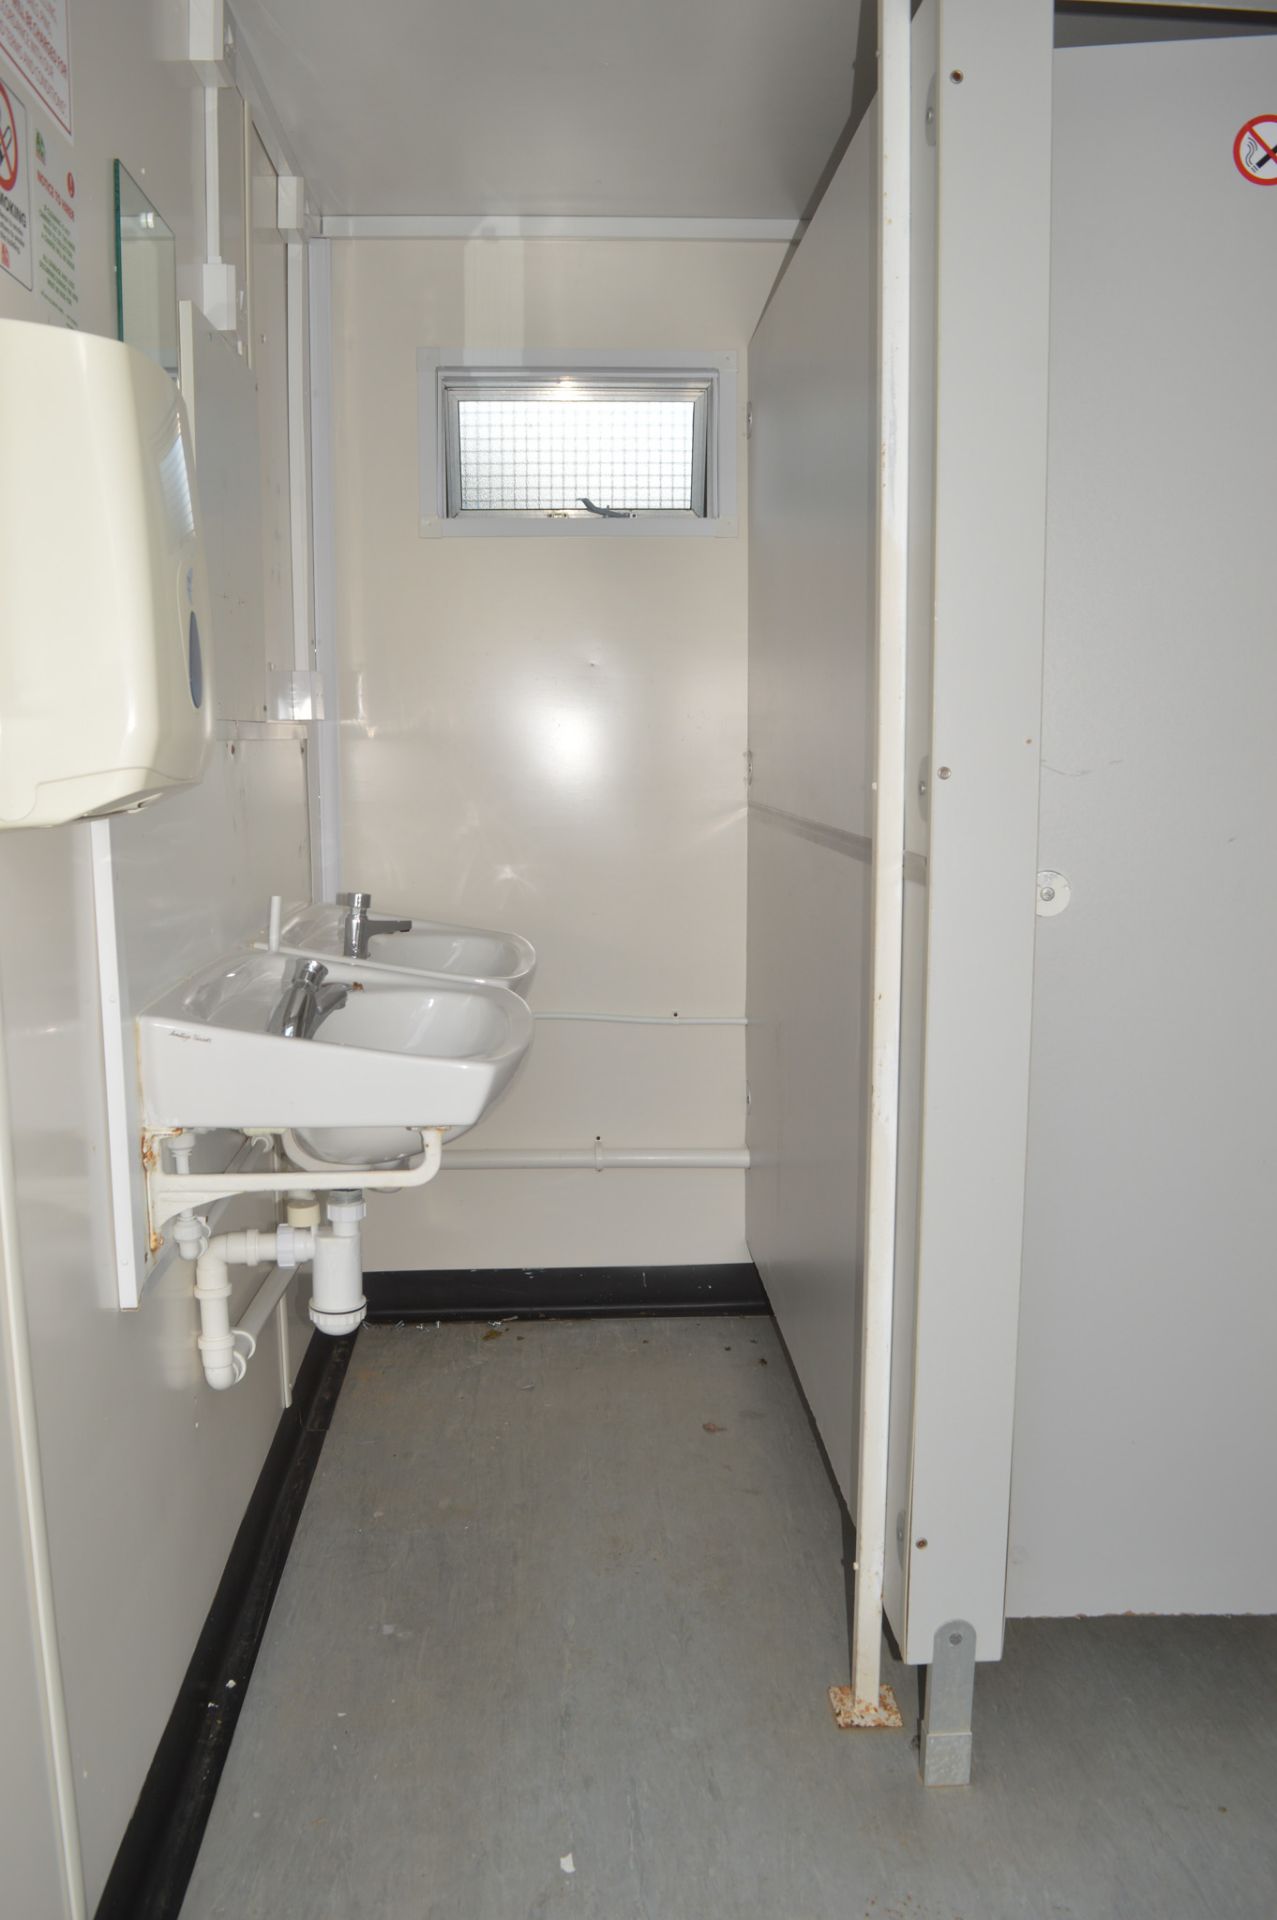 12 ft x 8 ft jack leg steel anti vandal toilet block  Comprising 2 cubicle toilets, 2 urinals and - Image 5 of 8